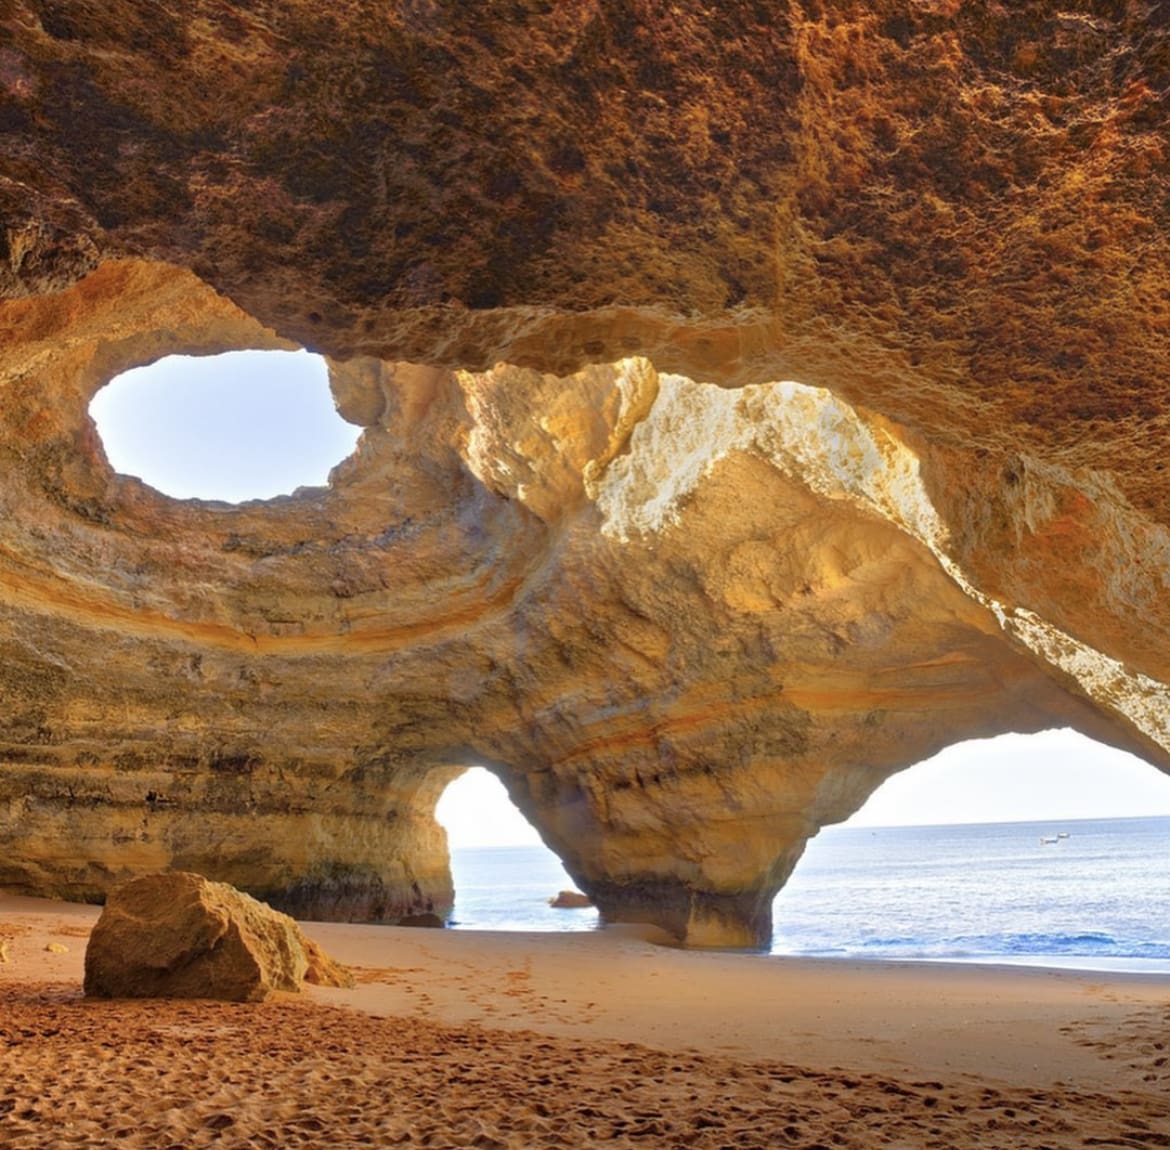 Benagil cave, one of the highlights of Algarve's beaches and a favourite among those who choose portugal for honeymoon